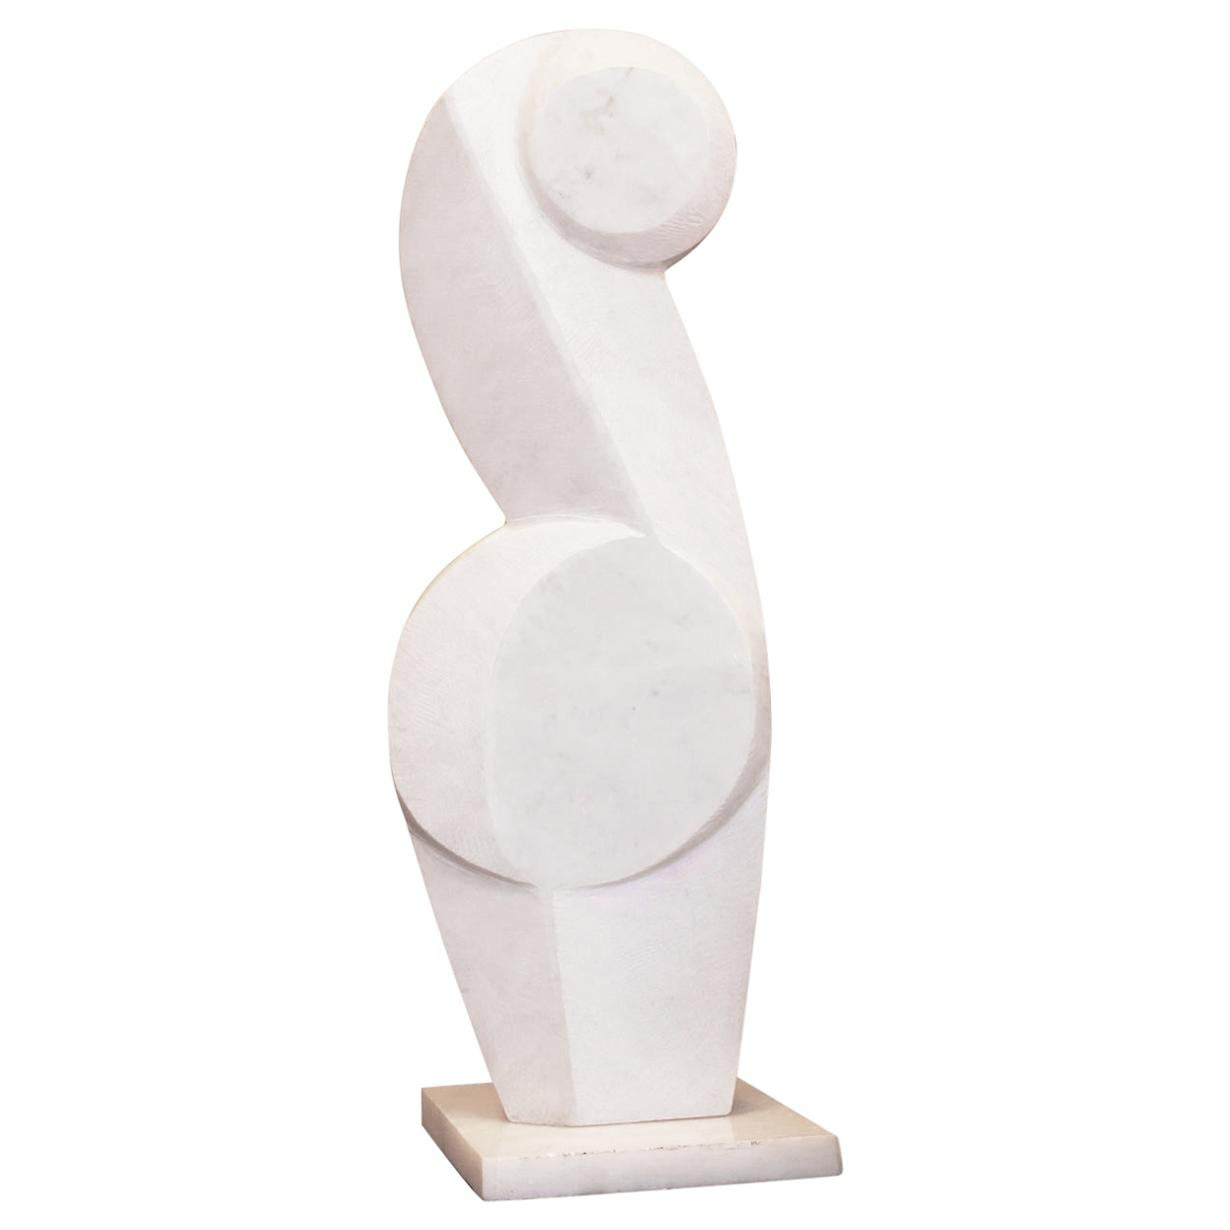 Sumptuous Hand Carved Marble Sculpture by "Savy", France 2010, One-of-a-Kind im Angebot